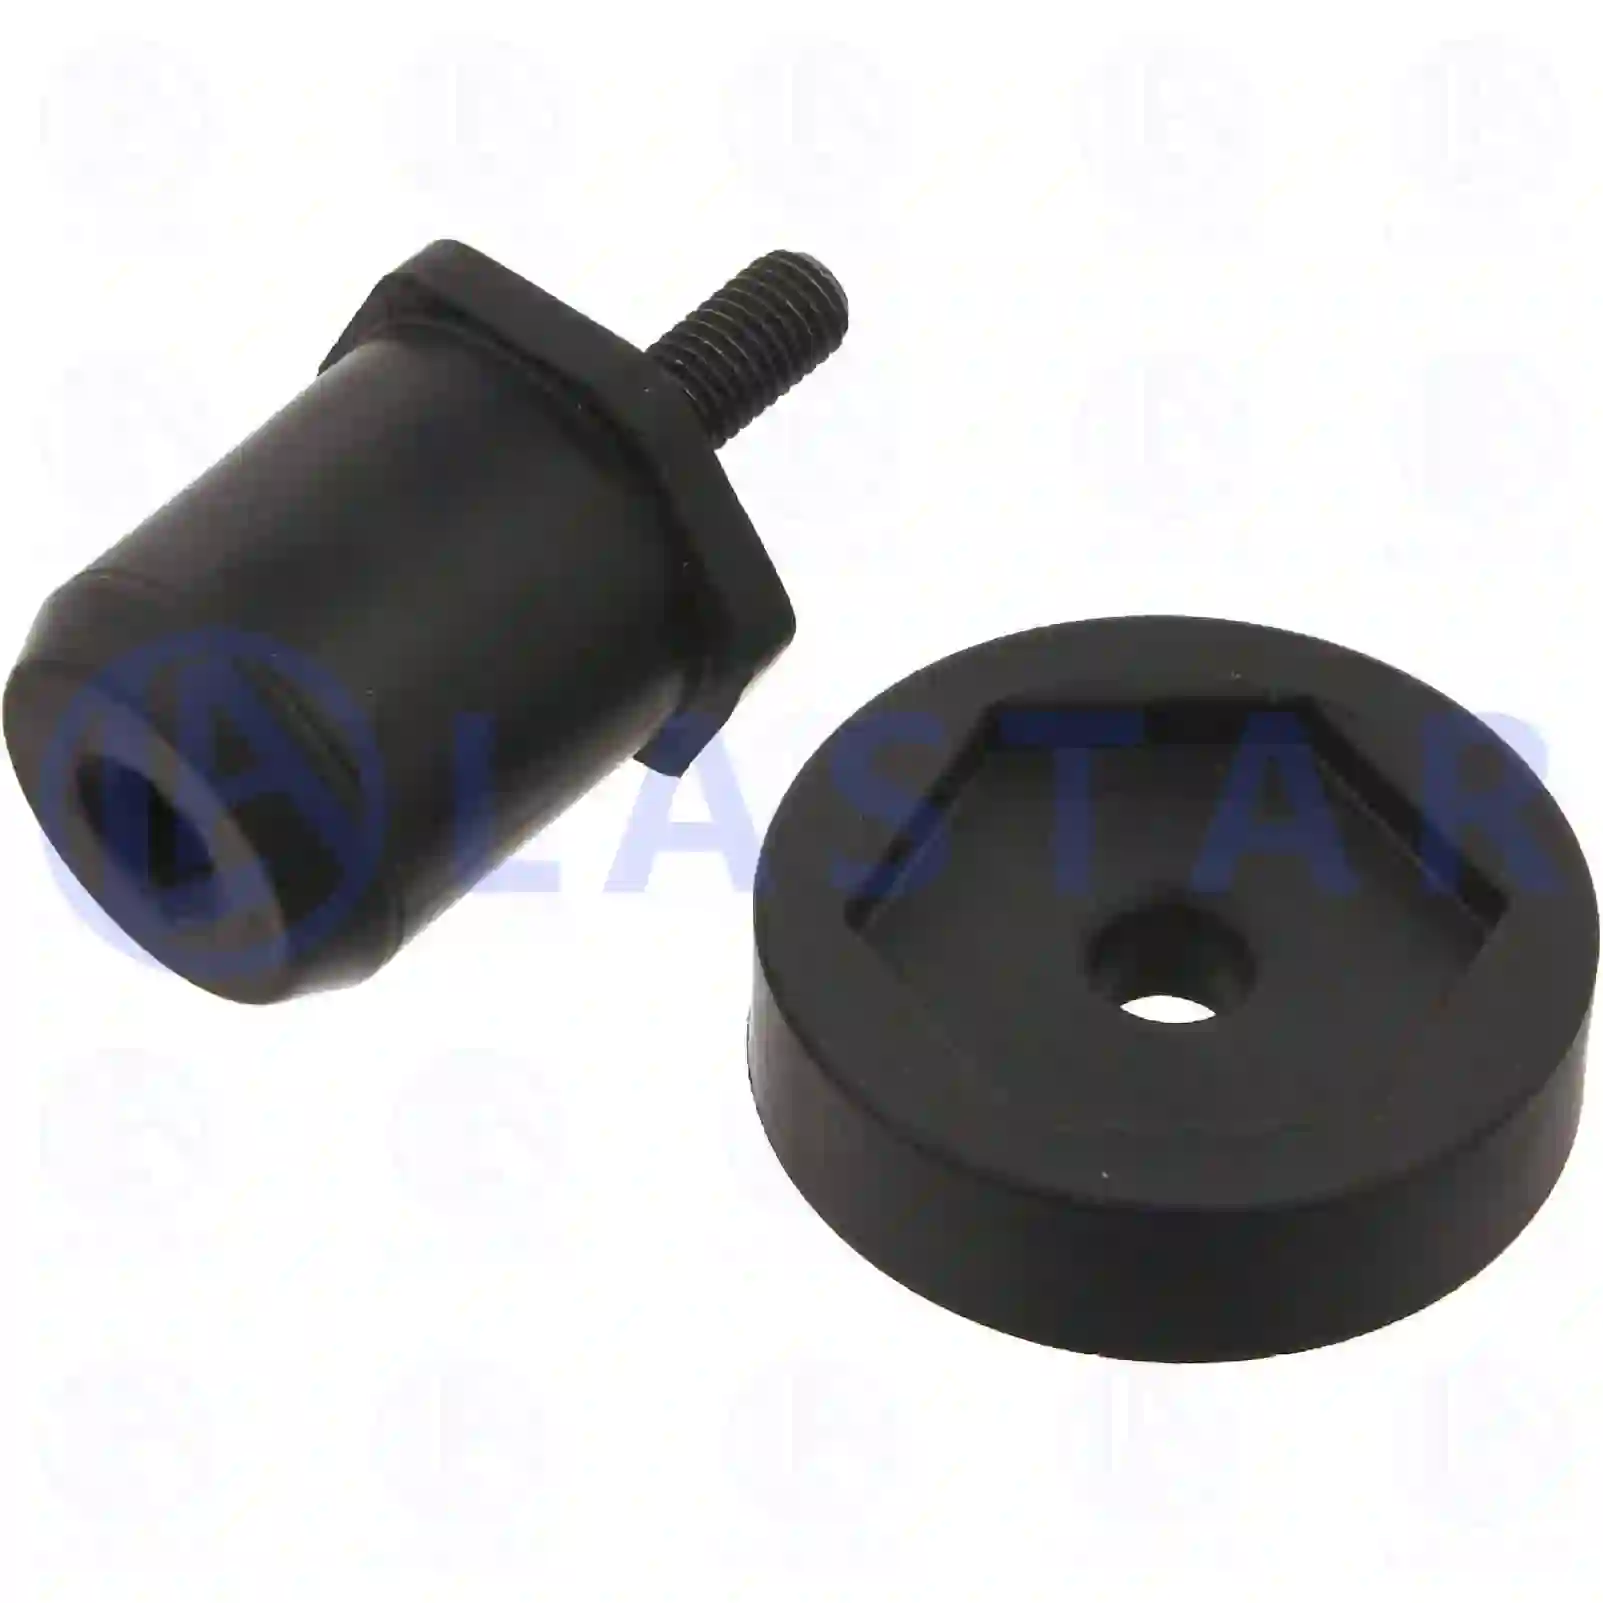 Rubber buffer, complete with plastic cap, 77735728, 20429148, 21333684, ZG41457-0008 ||  77735728 Lastar Spare Part | Truck Spare Parts, Auotomotive Spare Parts Rubber buffer, complete with plastic cap, 77735728, 20429148, 21333684, ZG41457-0008 ||  77735728 Lastar Spare Part | Truck Spare Parts, Auotomotive Spare Parts